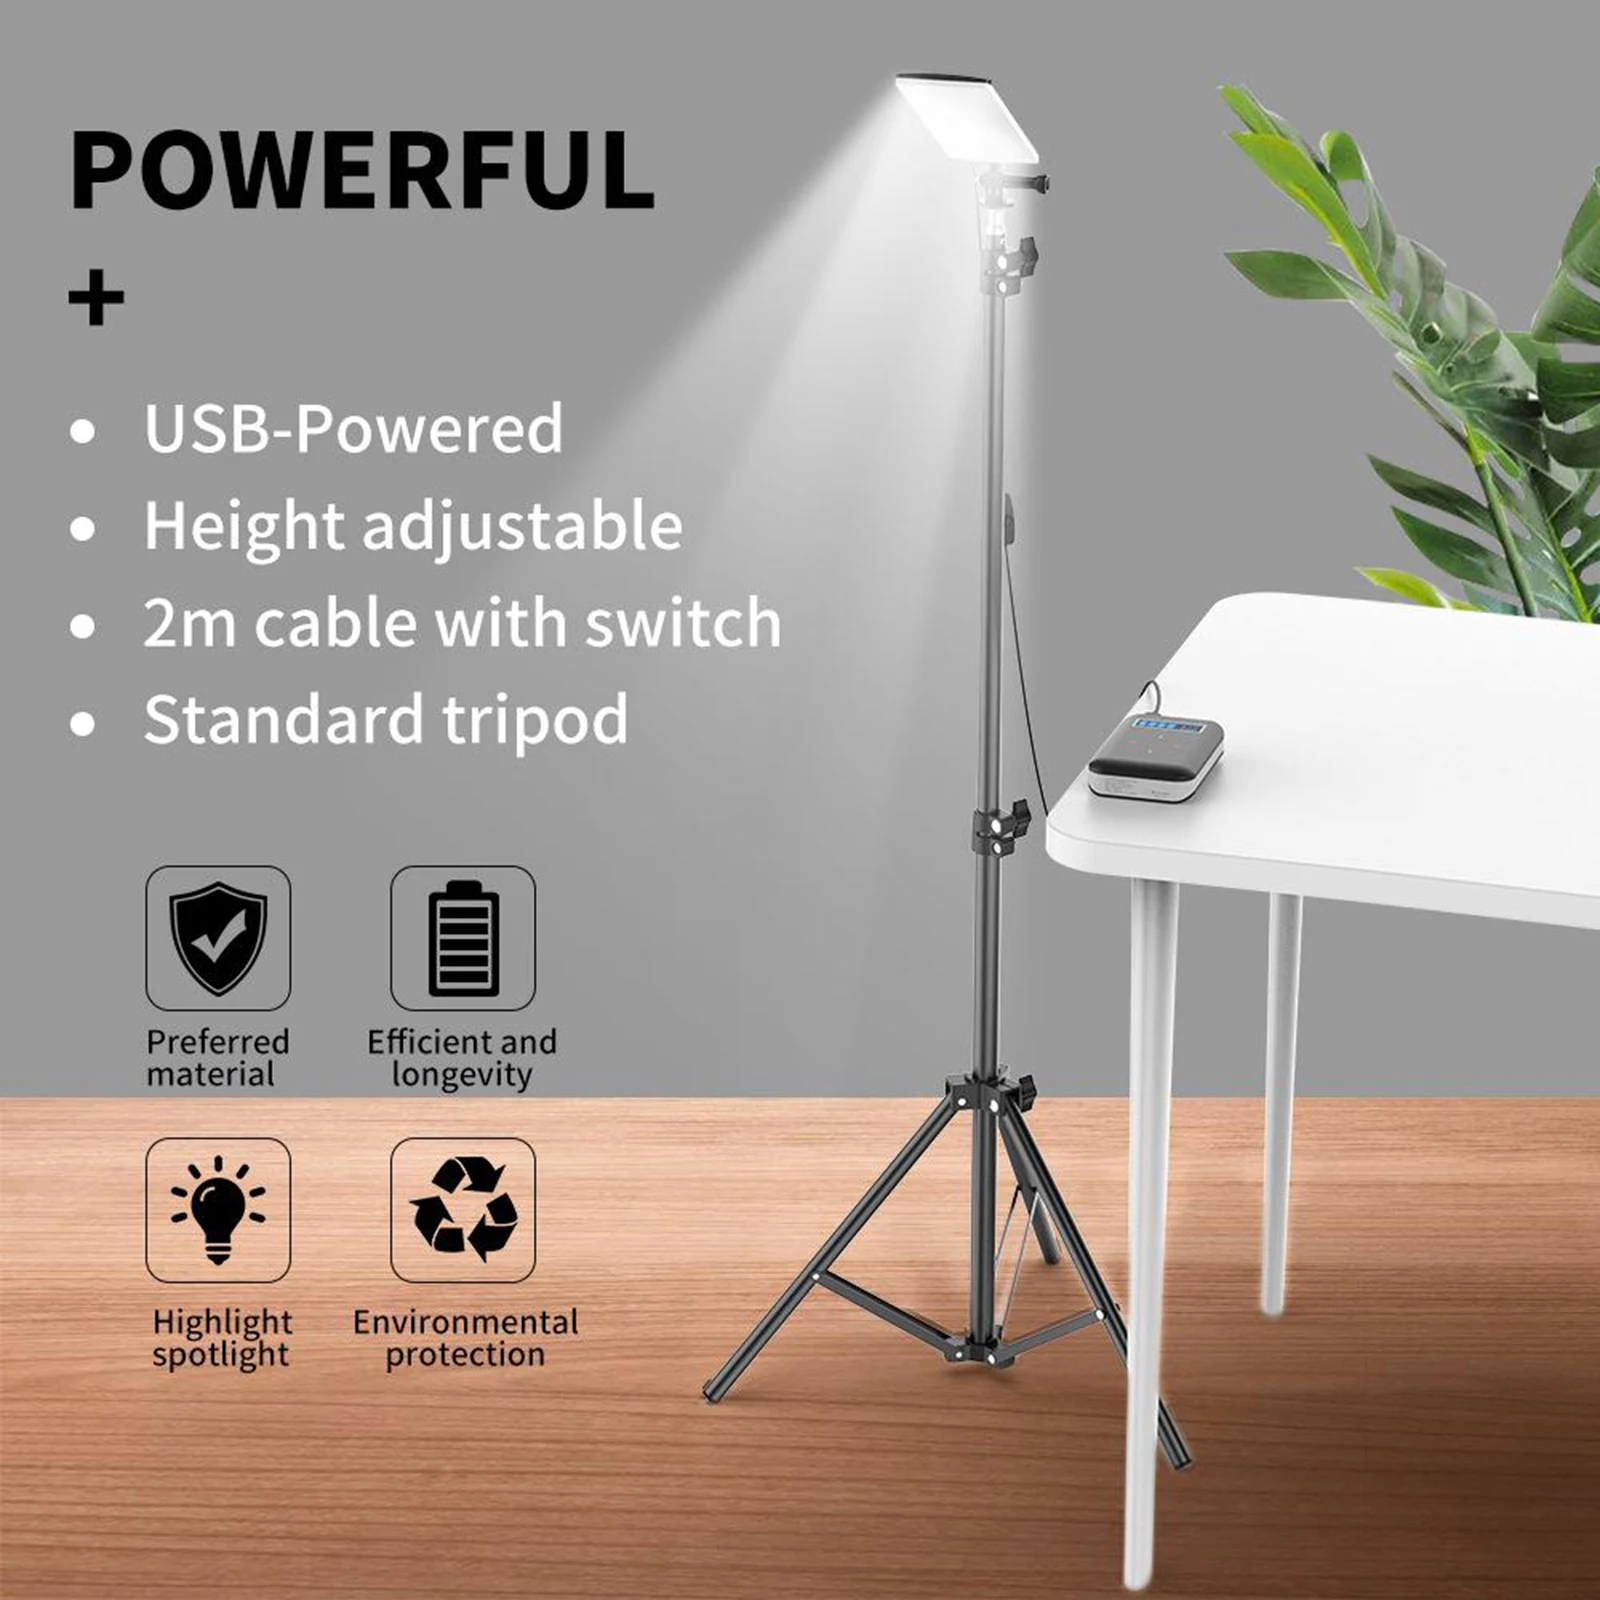 https://ae01.alicdn.com/kf/H968e9b9a9f064a9a84e5bb7b72aa9ce8f/Adjustable-LED-Flood-Light-Tripod-Stand-Camping-Lantern-Home-Outdoor-Tent-Lamp-Hiking-Camping-Lanters-Folding.jpg